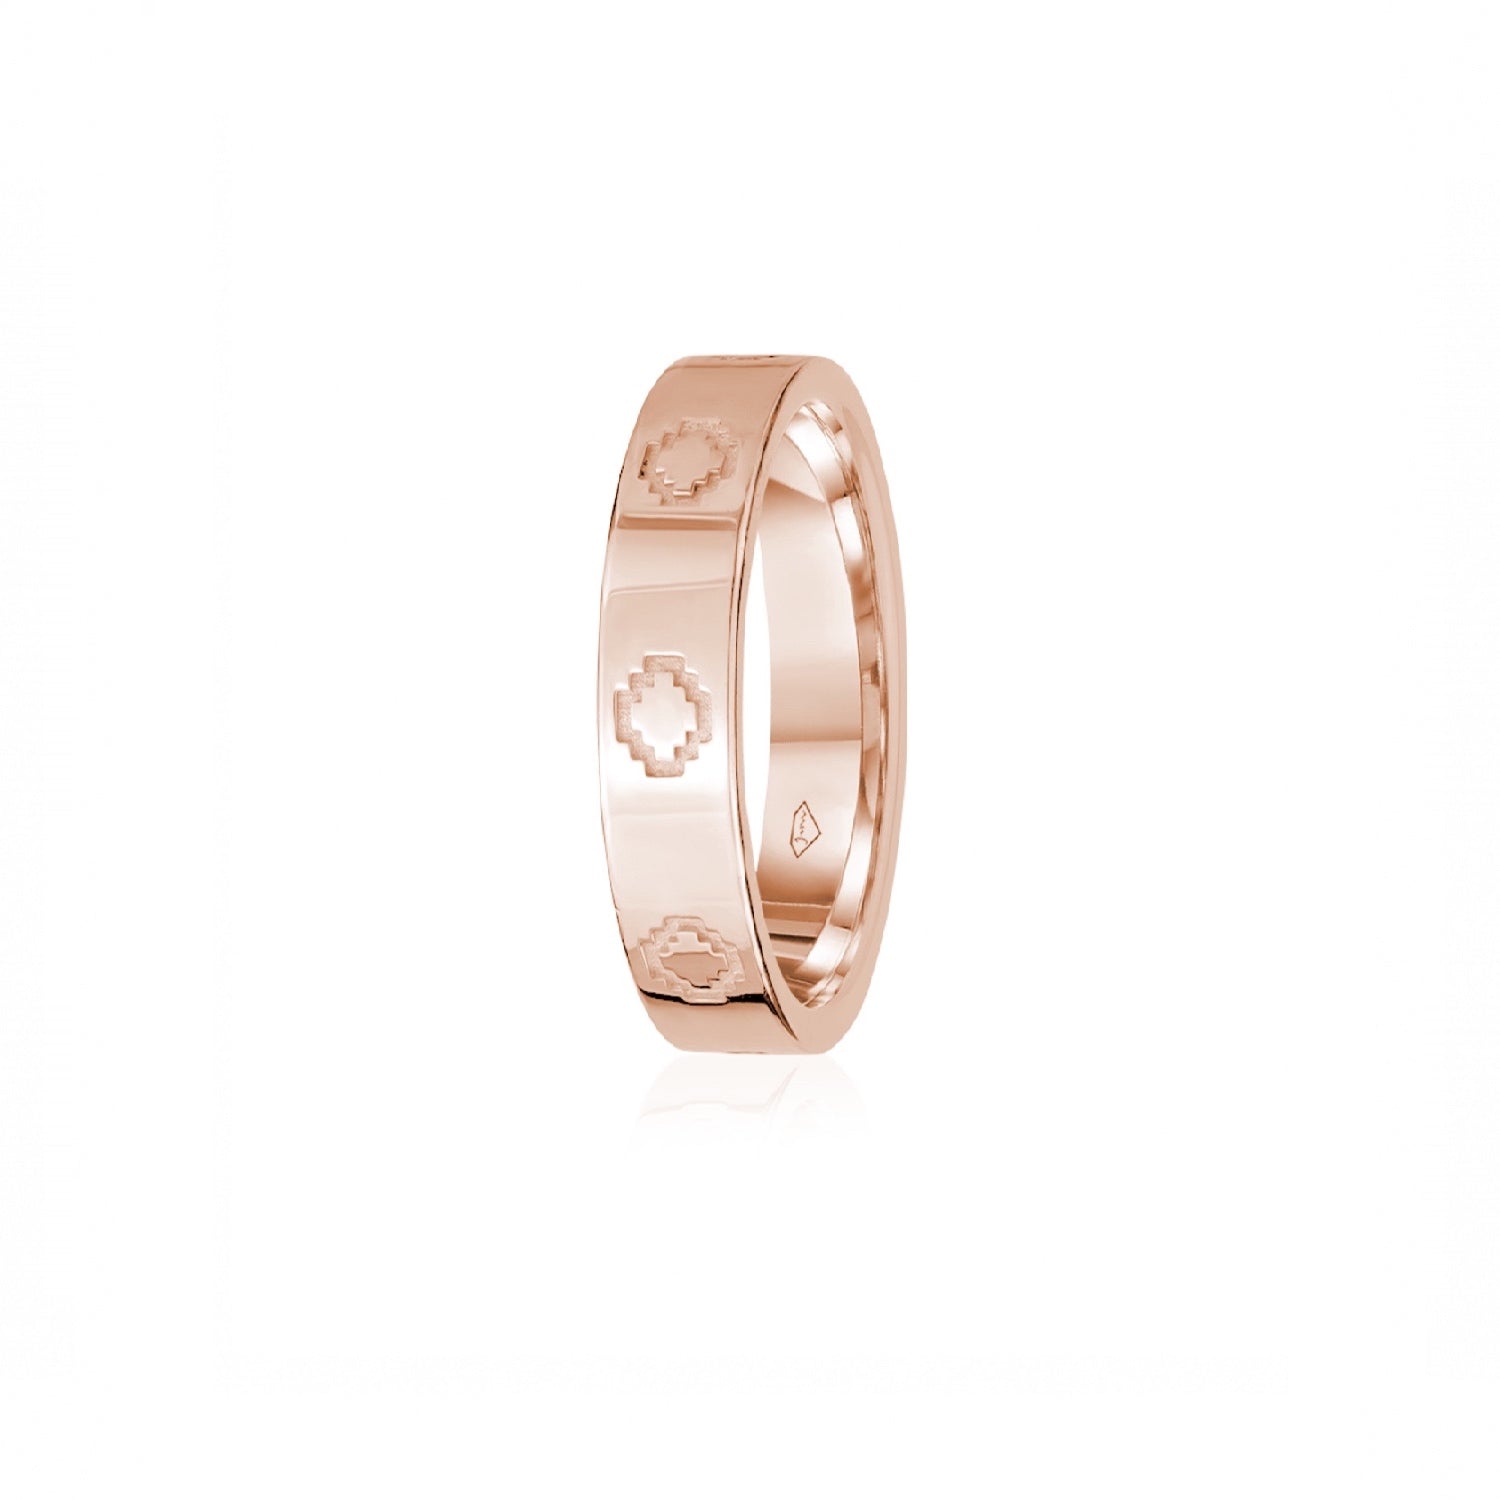 Step Motif Polished Finish Square Edge 5 mm Wedding Band in Rose Gold